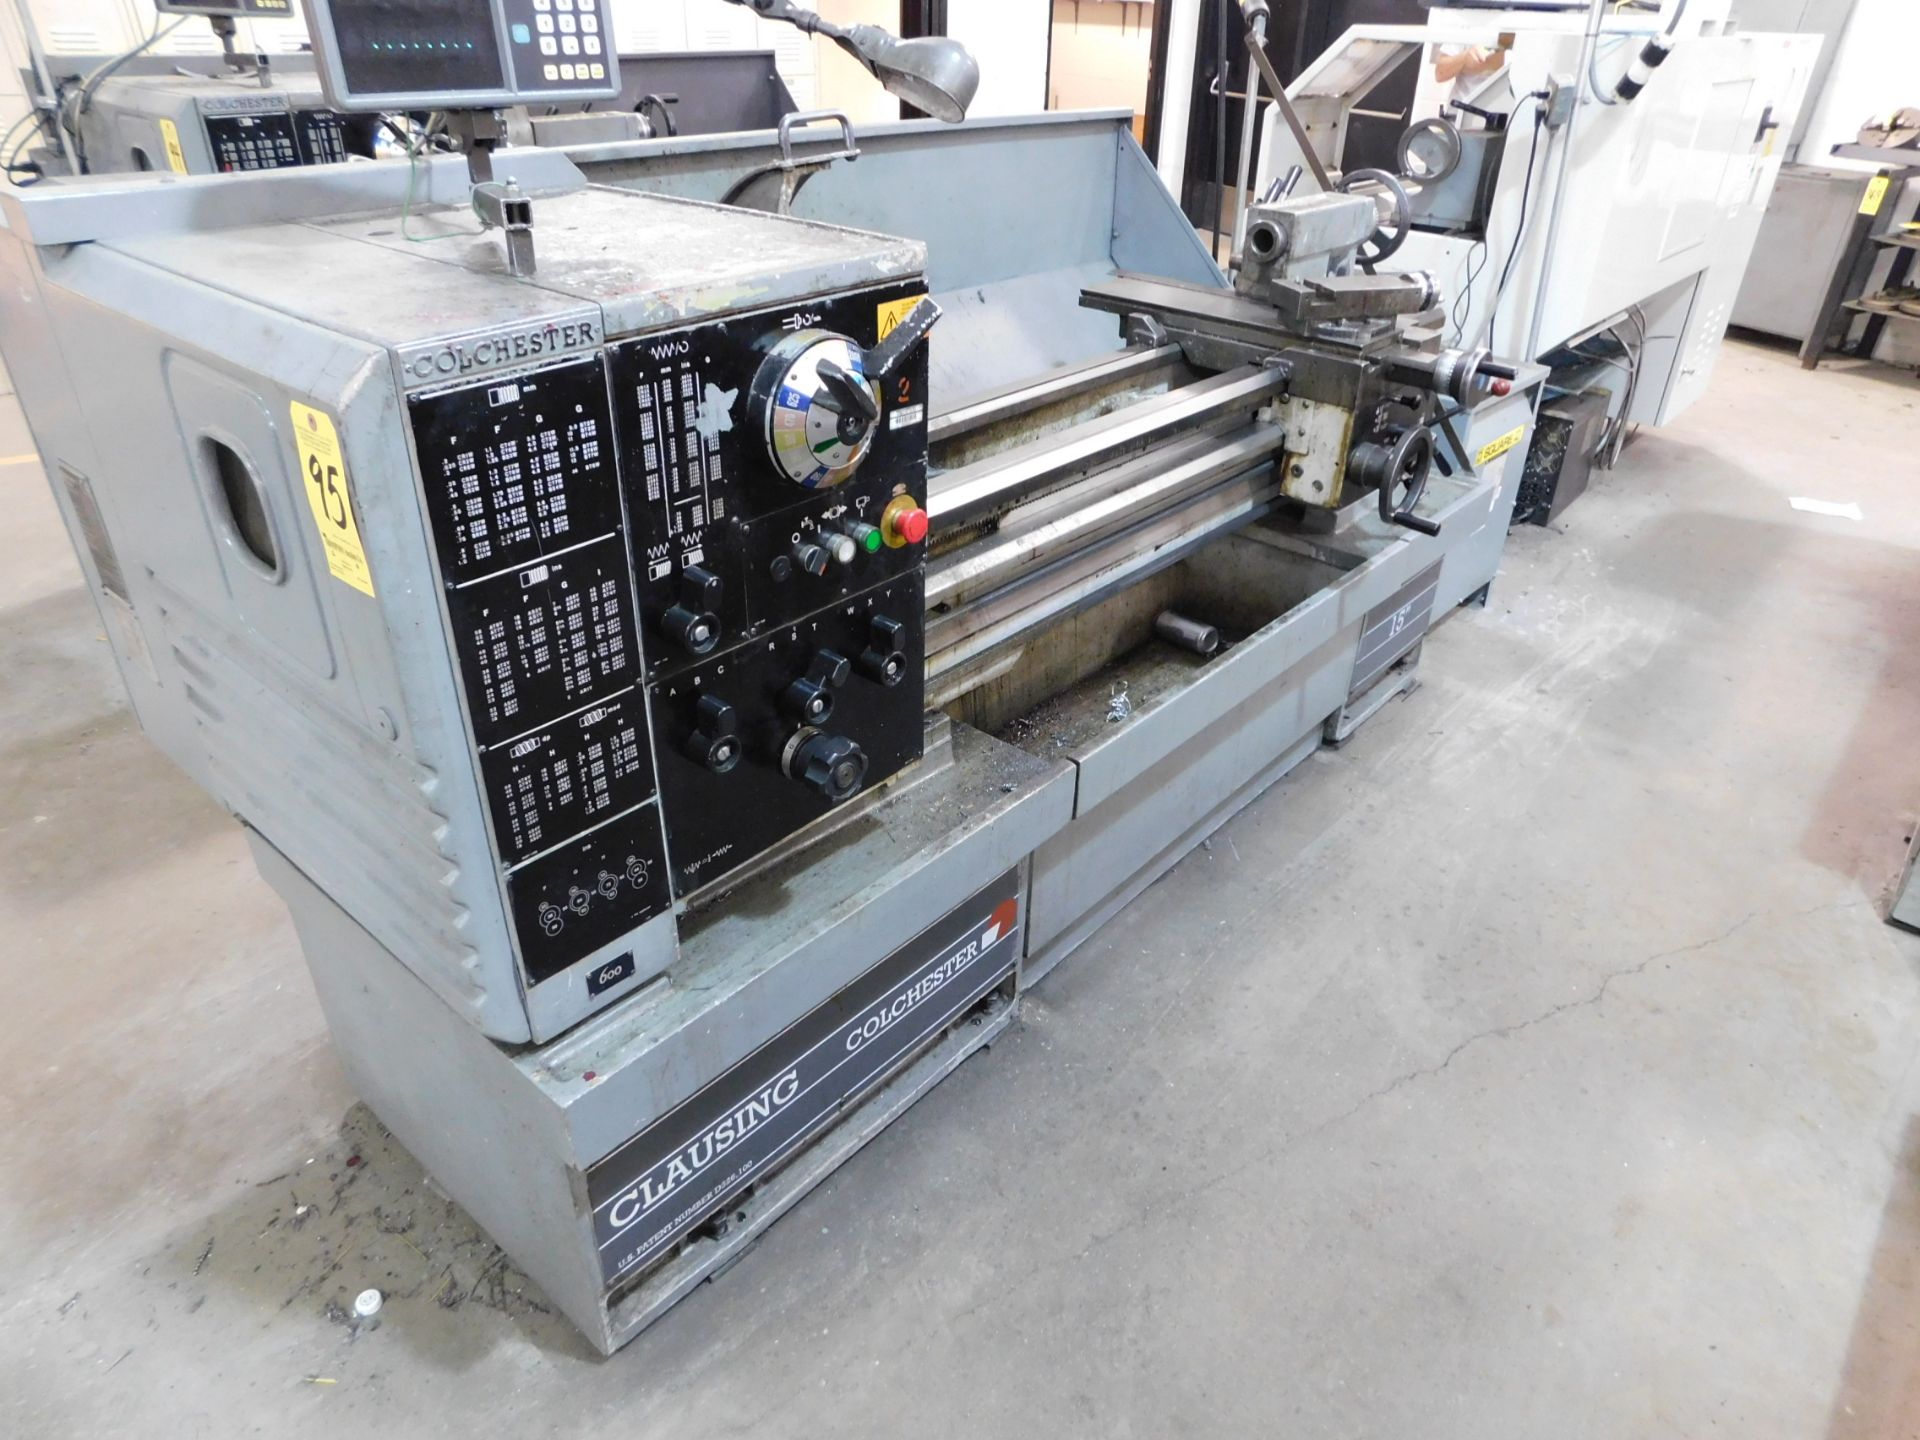 Clausing Colchester 15" x 50" Toolroom Lathe, SN TG0568-502, with Anilam Wizard 211 2-Axis Digital